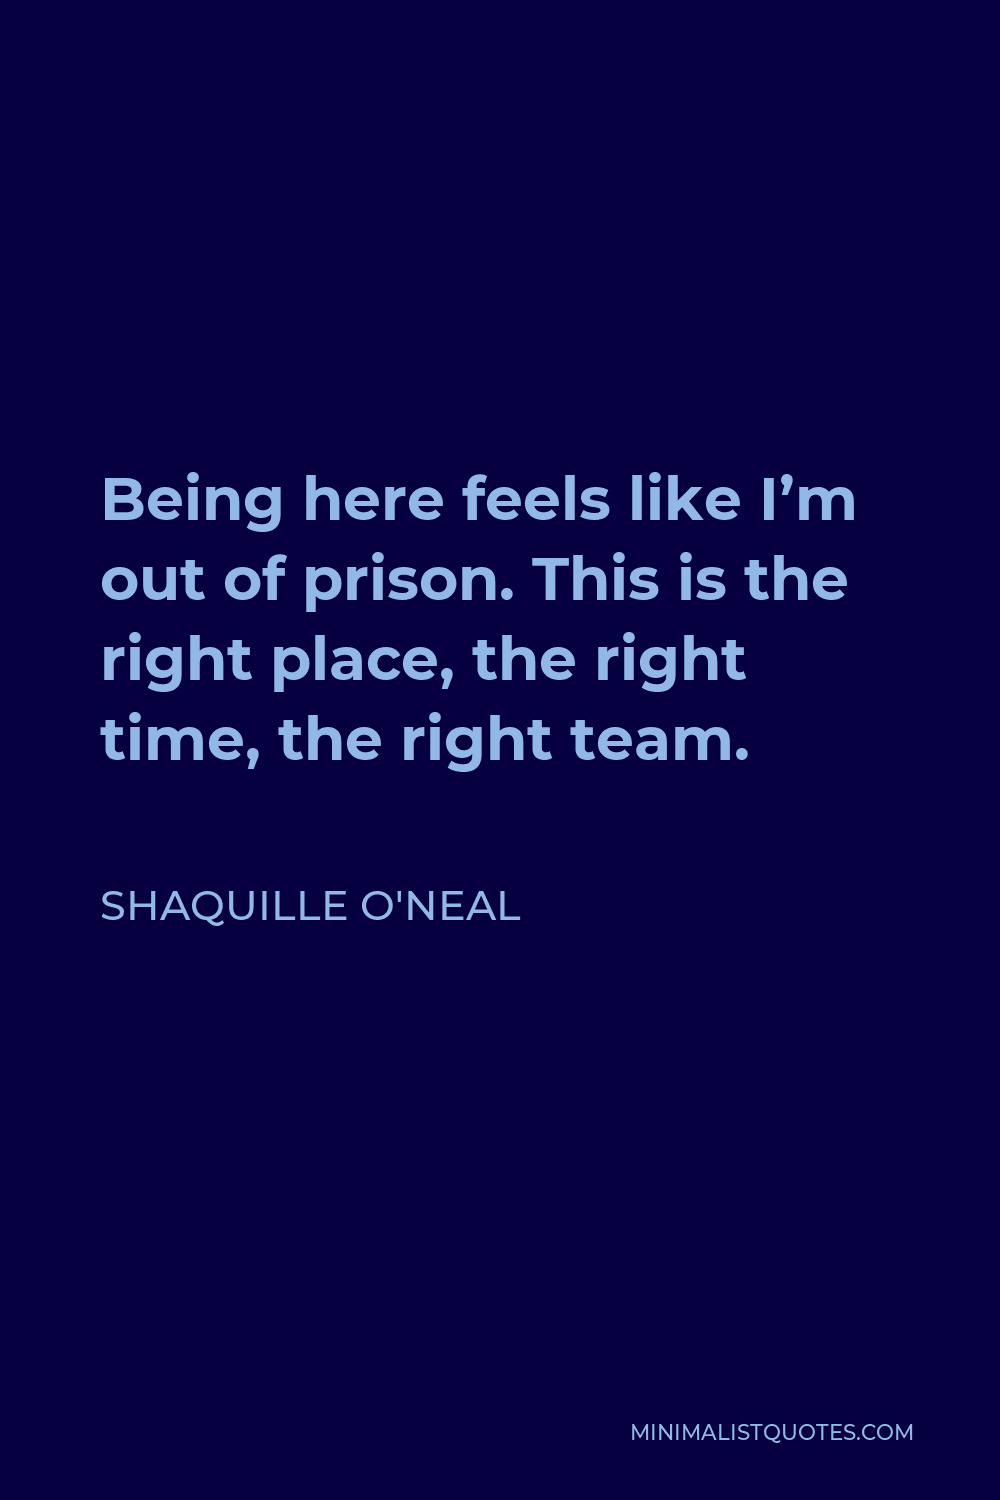 Shaquille O'Neal Quote - Being here feels like I’m out of prison. This is the right place, the right time, the right team.